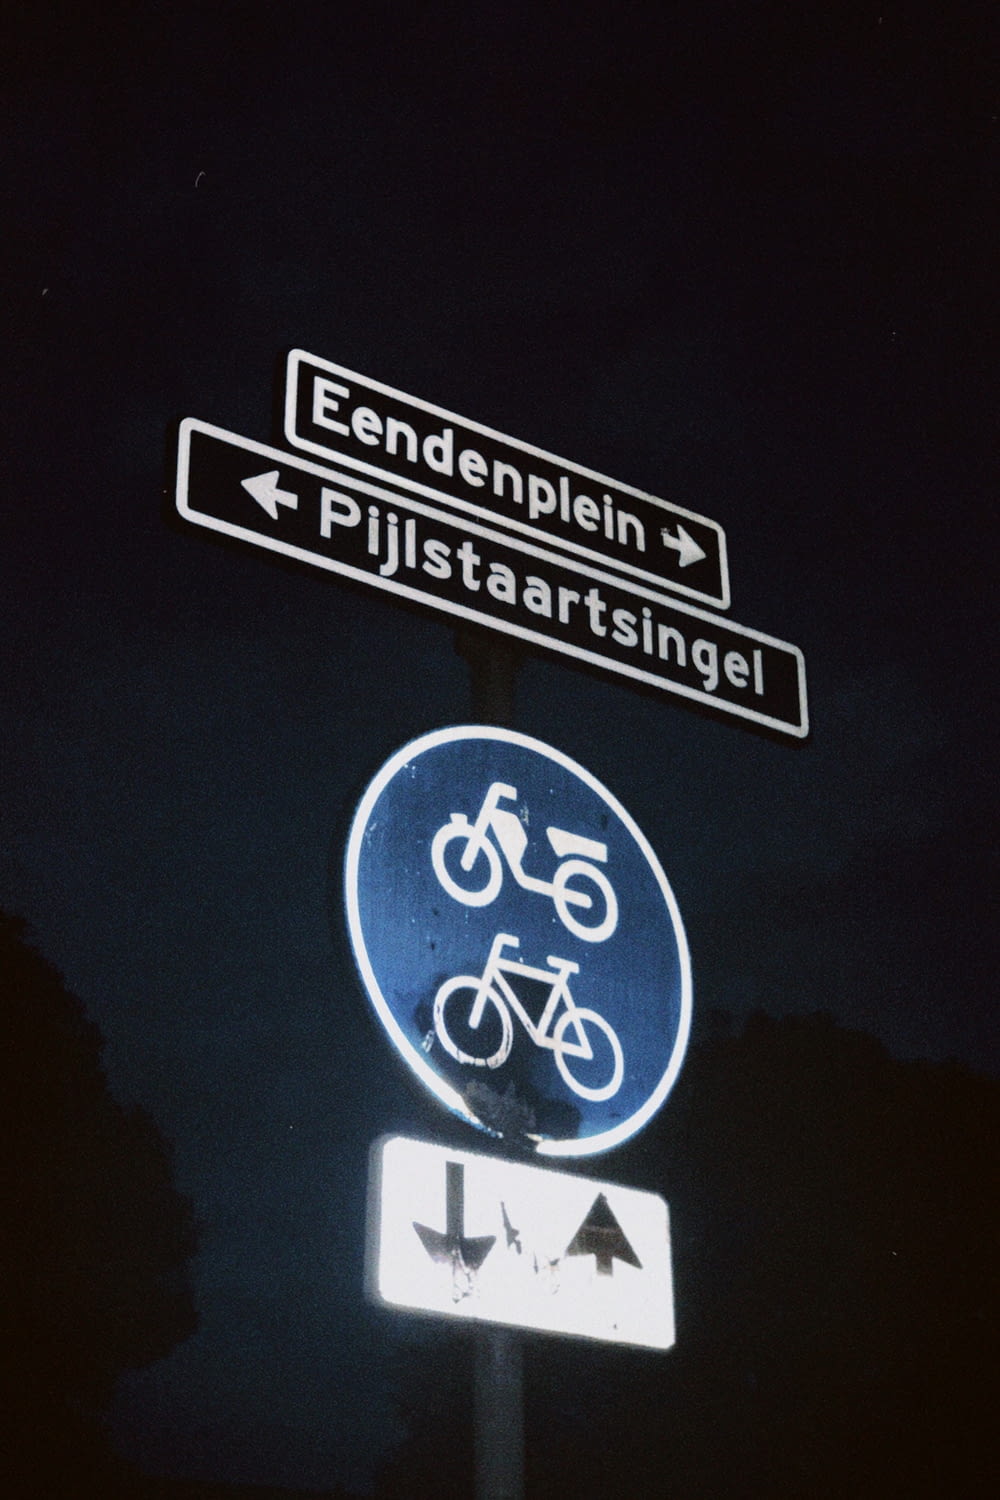 a street sign with a bicycle on it